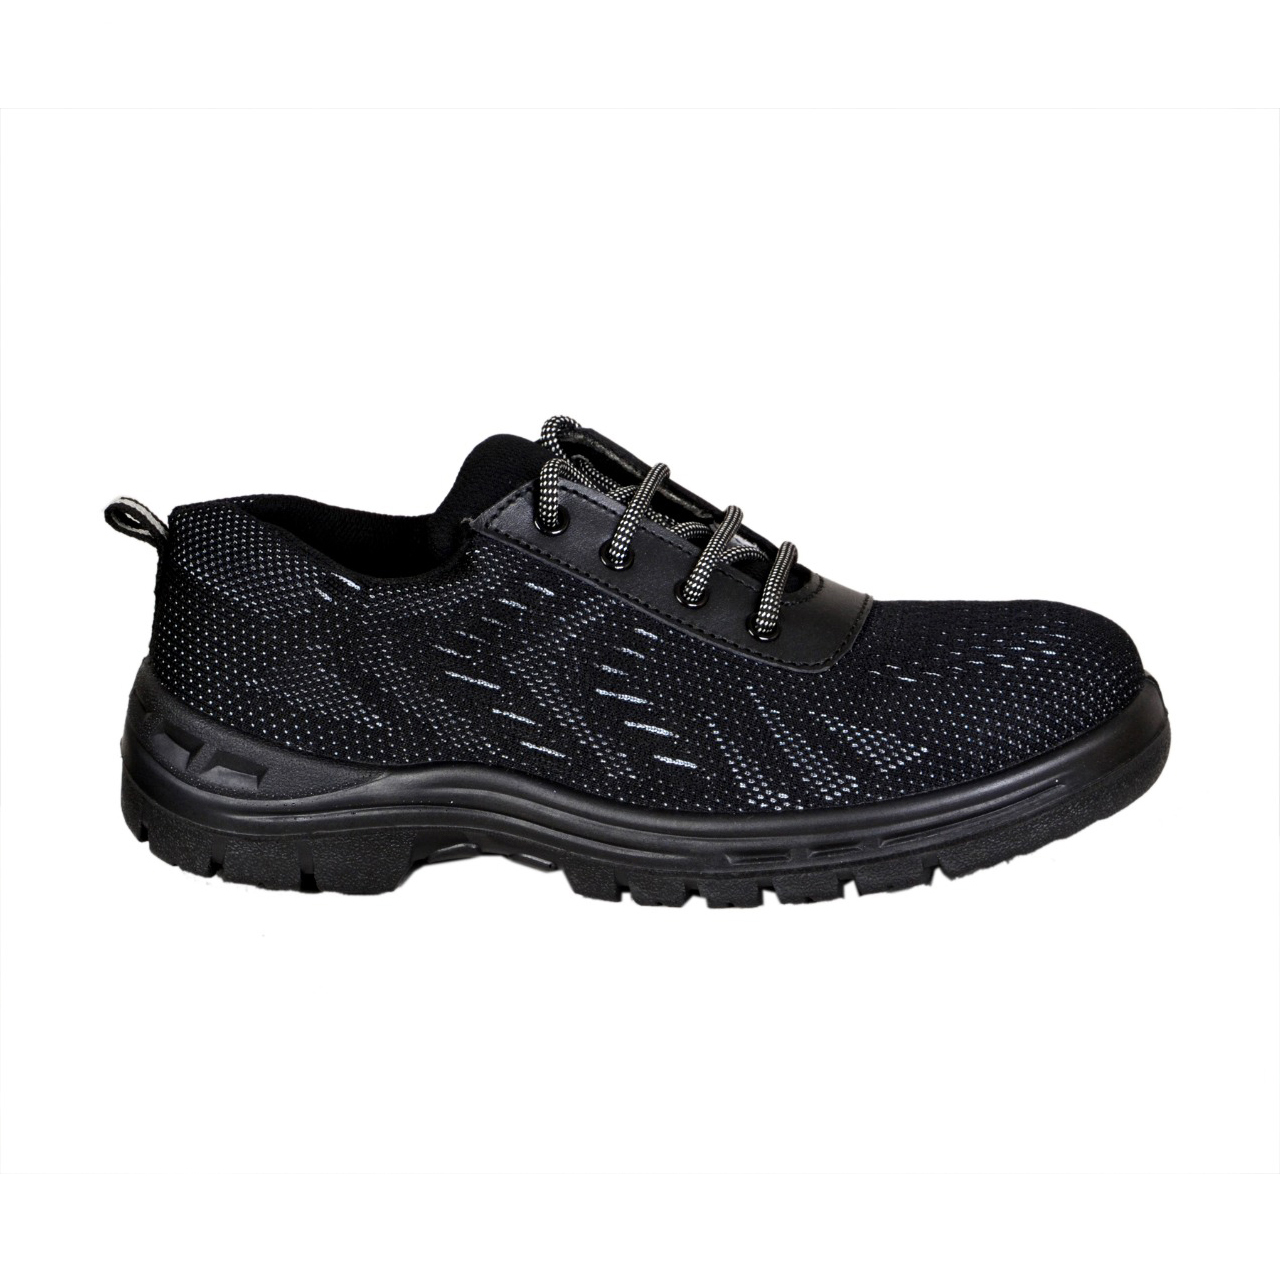 Safety Shoe Suitable For Automotive, Construction, Electronics, Manufacturing, Mining, Petrochemical, Aerospace & Aviation, Logistics & Transportation, Pharmaceutical factory and industry.